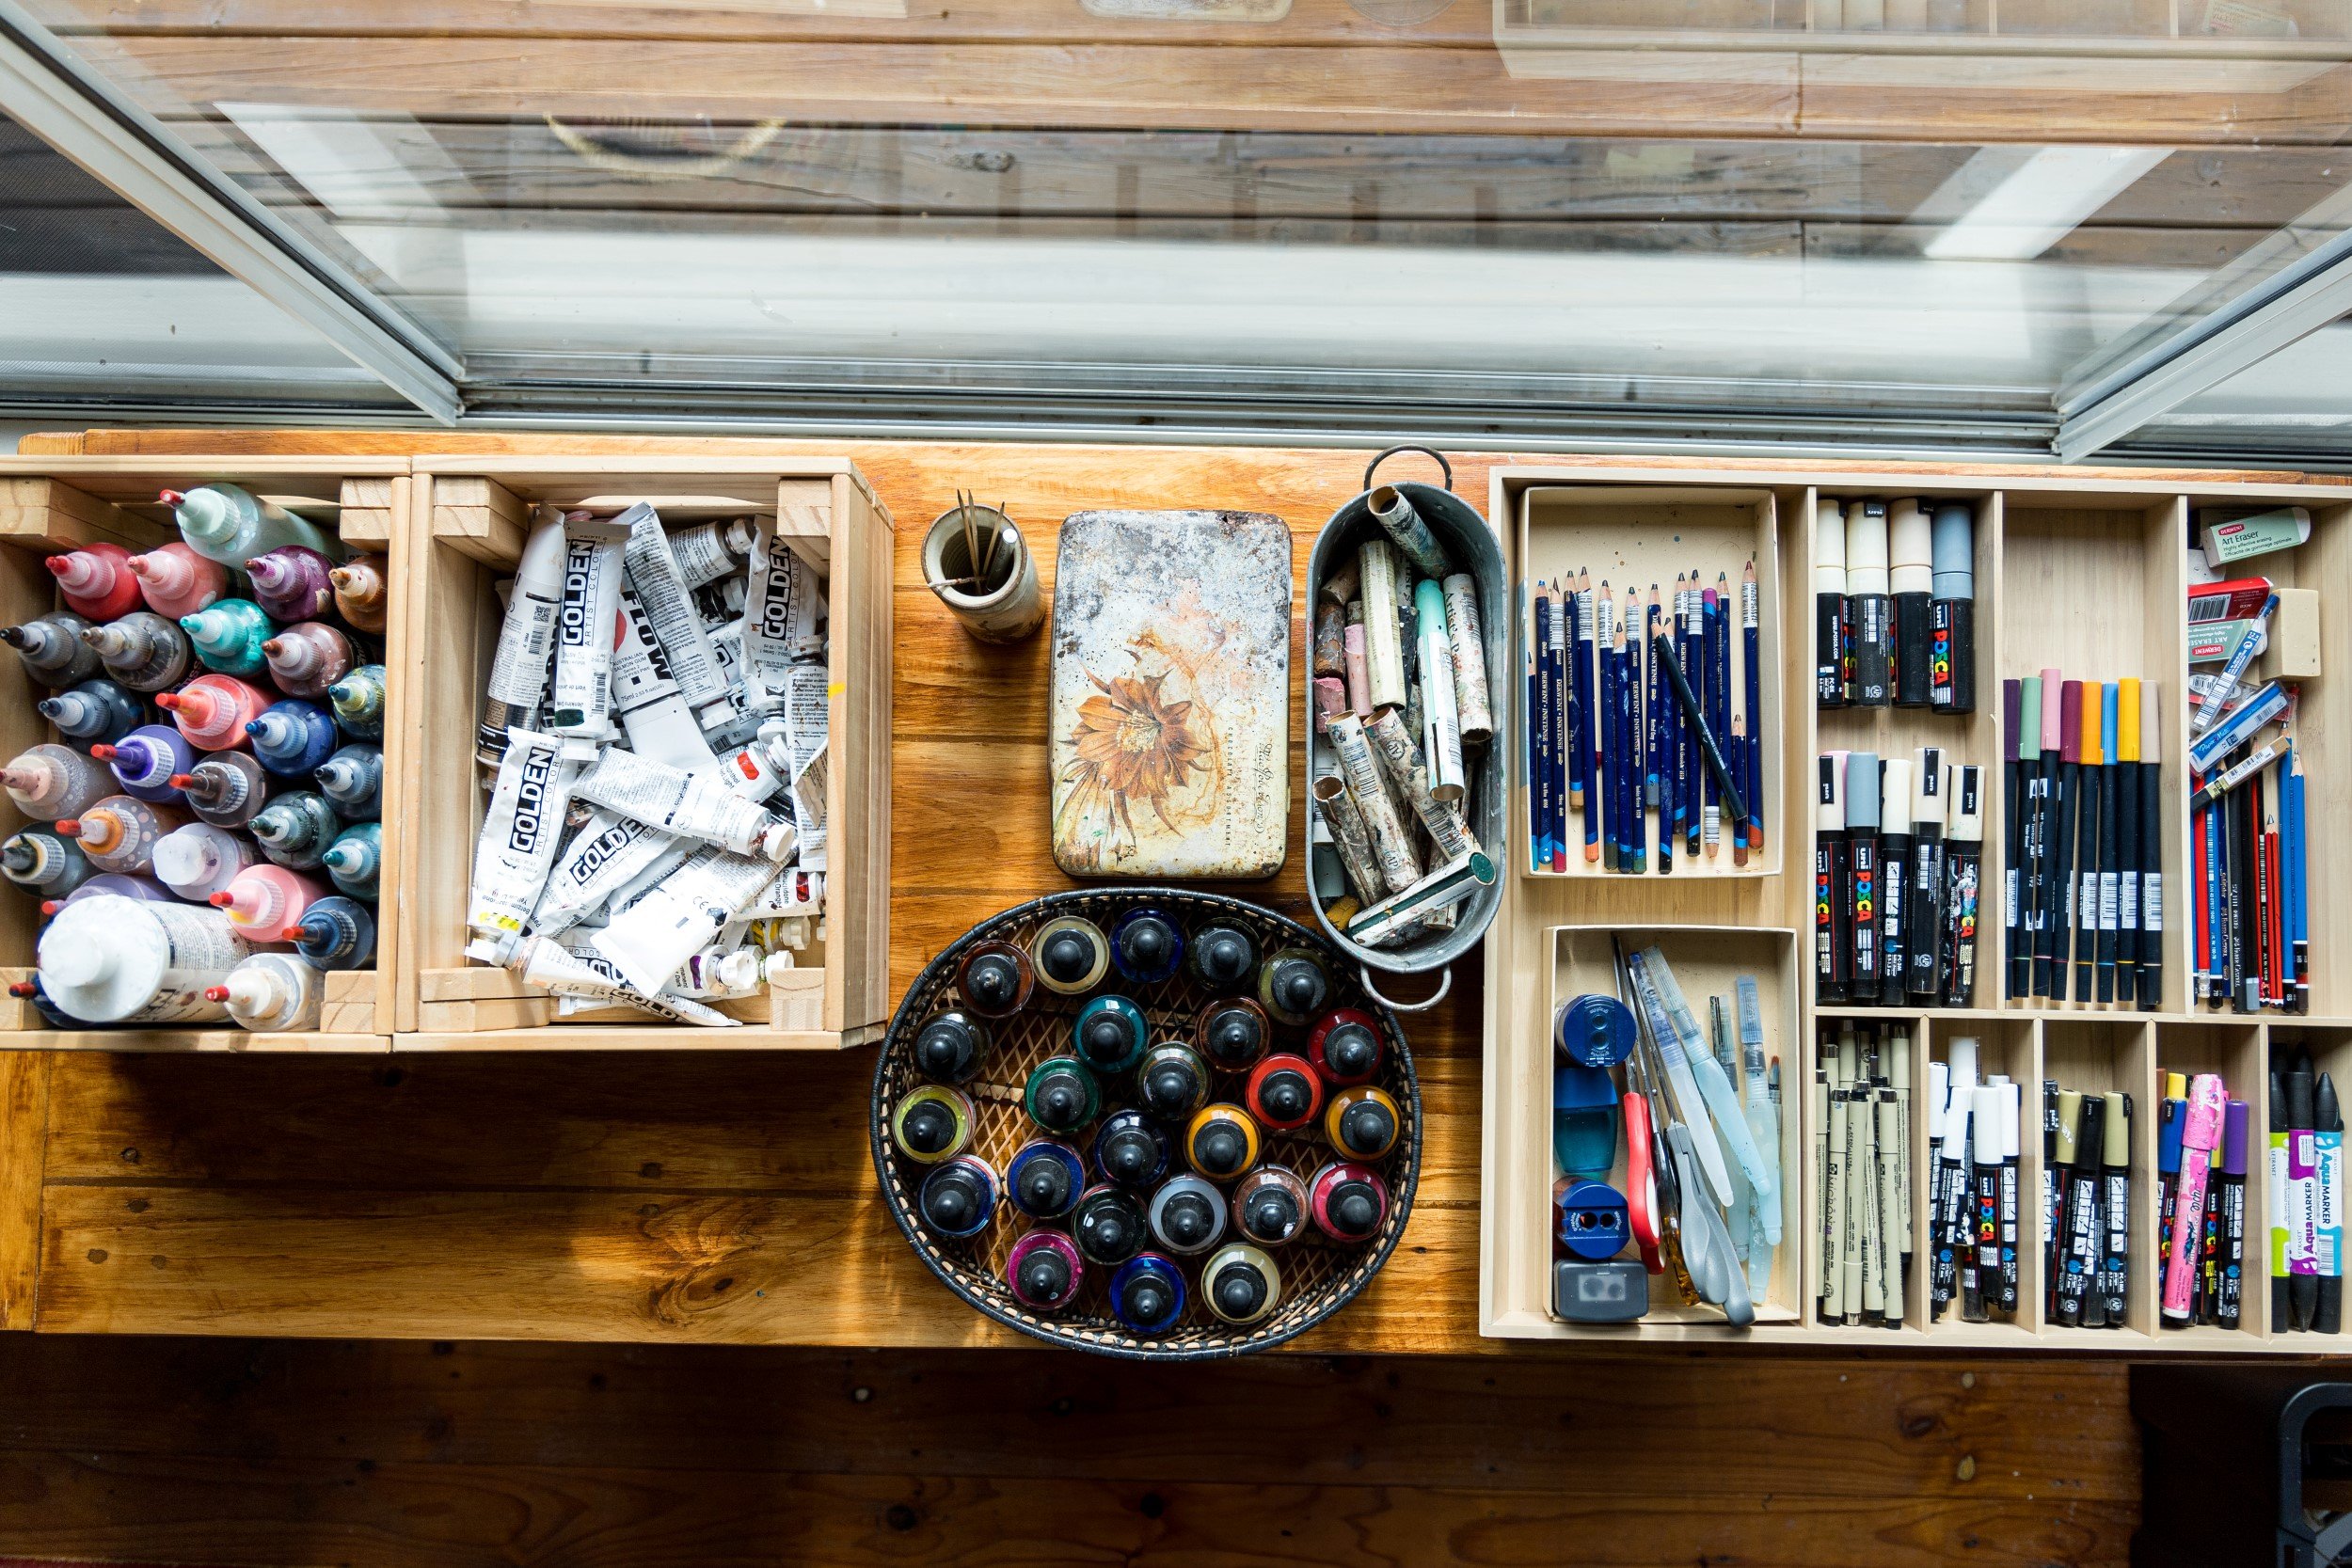  Bird’s eye view of a wooden bench with various art supplies on it, including paints, pens, inks, pastels, and pencils. 